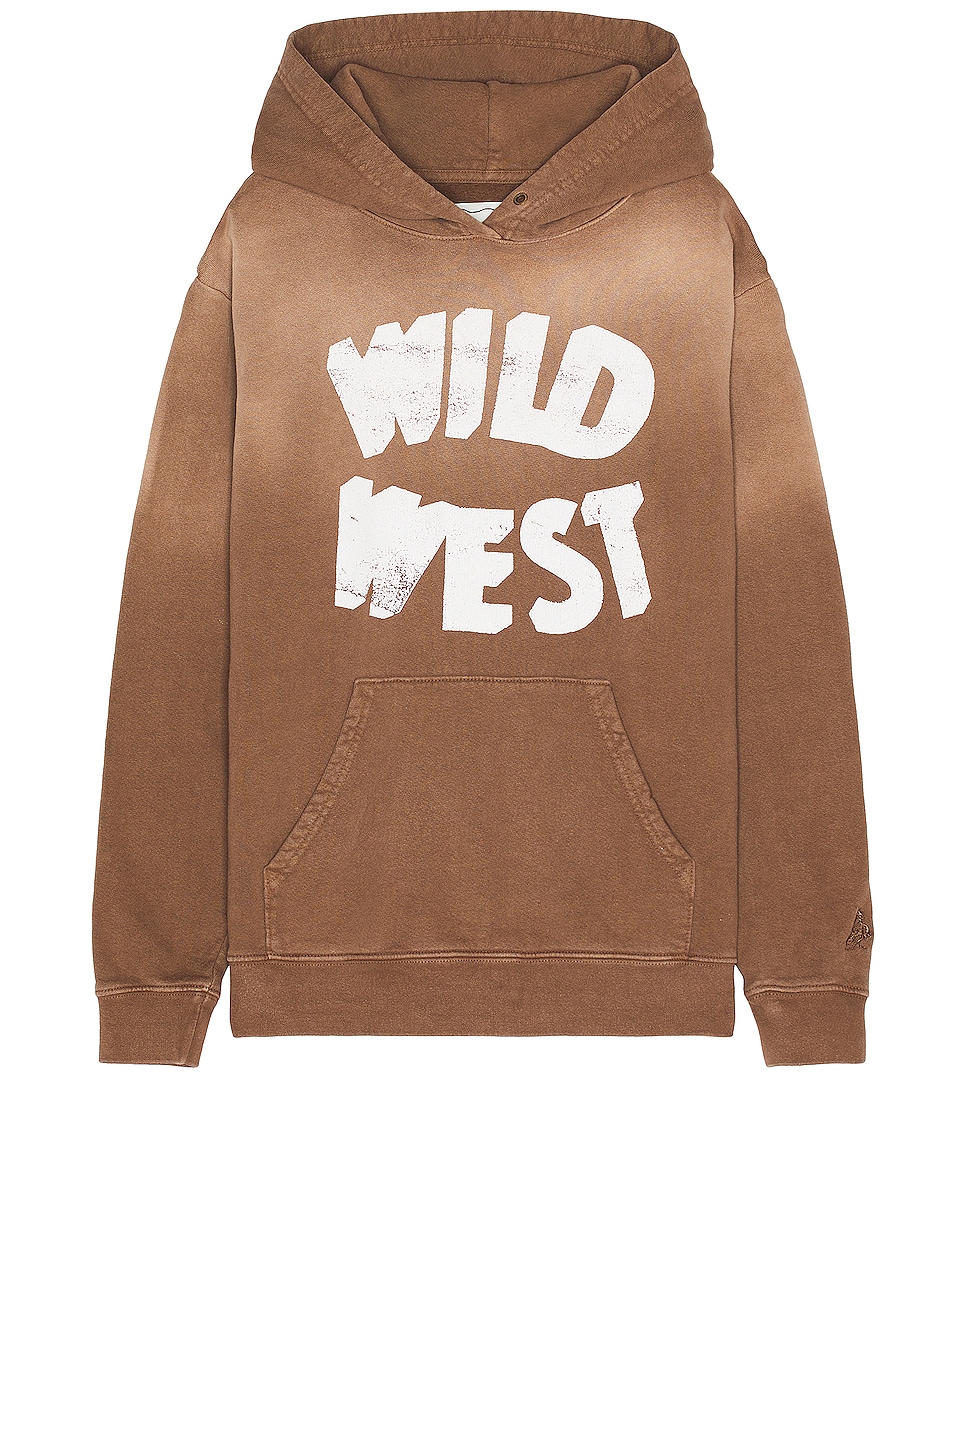 Image 1 of ONE OF THESE DAYS Wild West Hoodie in Mustang Brown